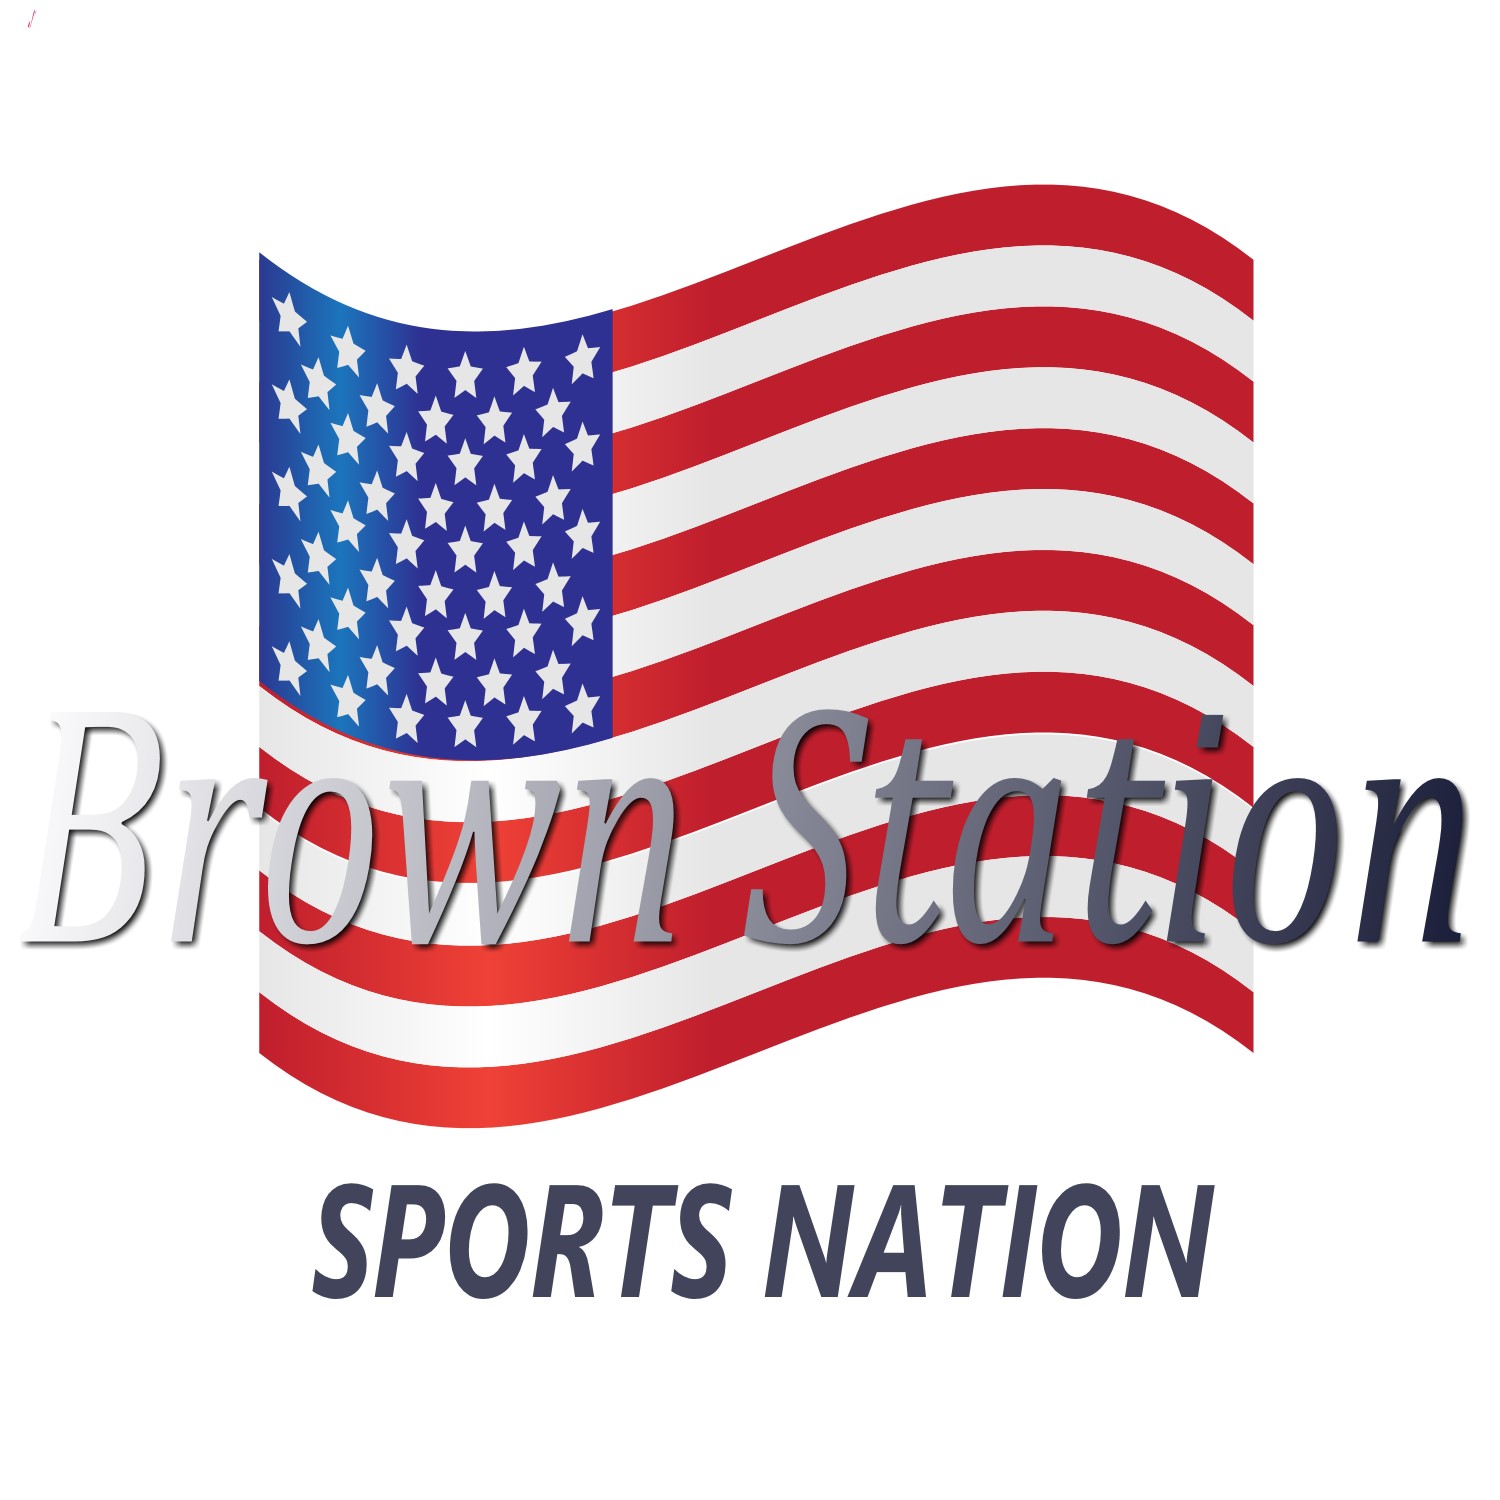 Brown Station Sports Nation